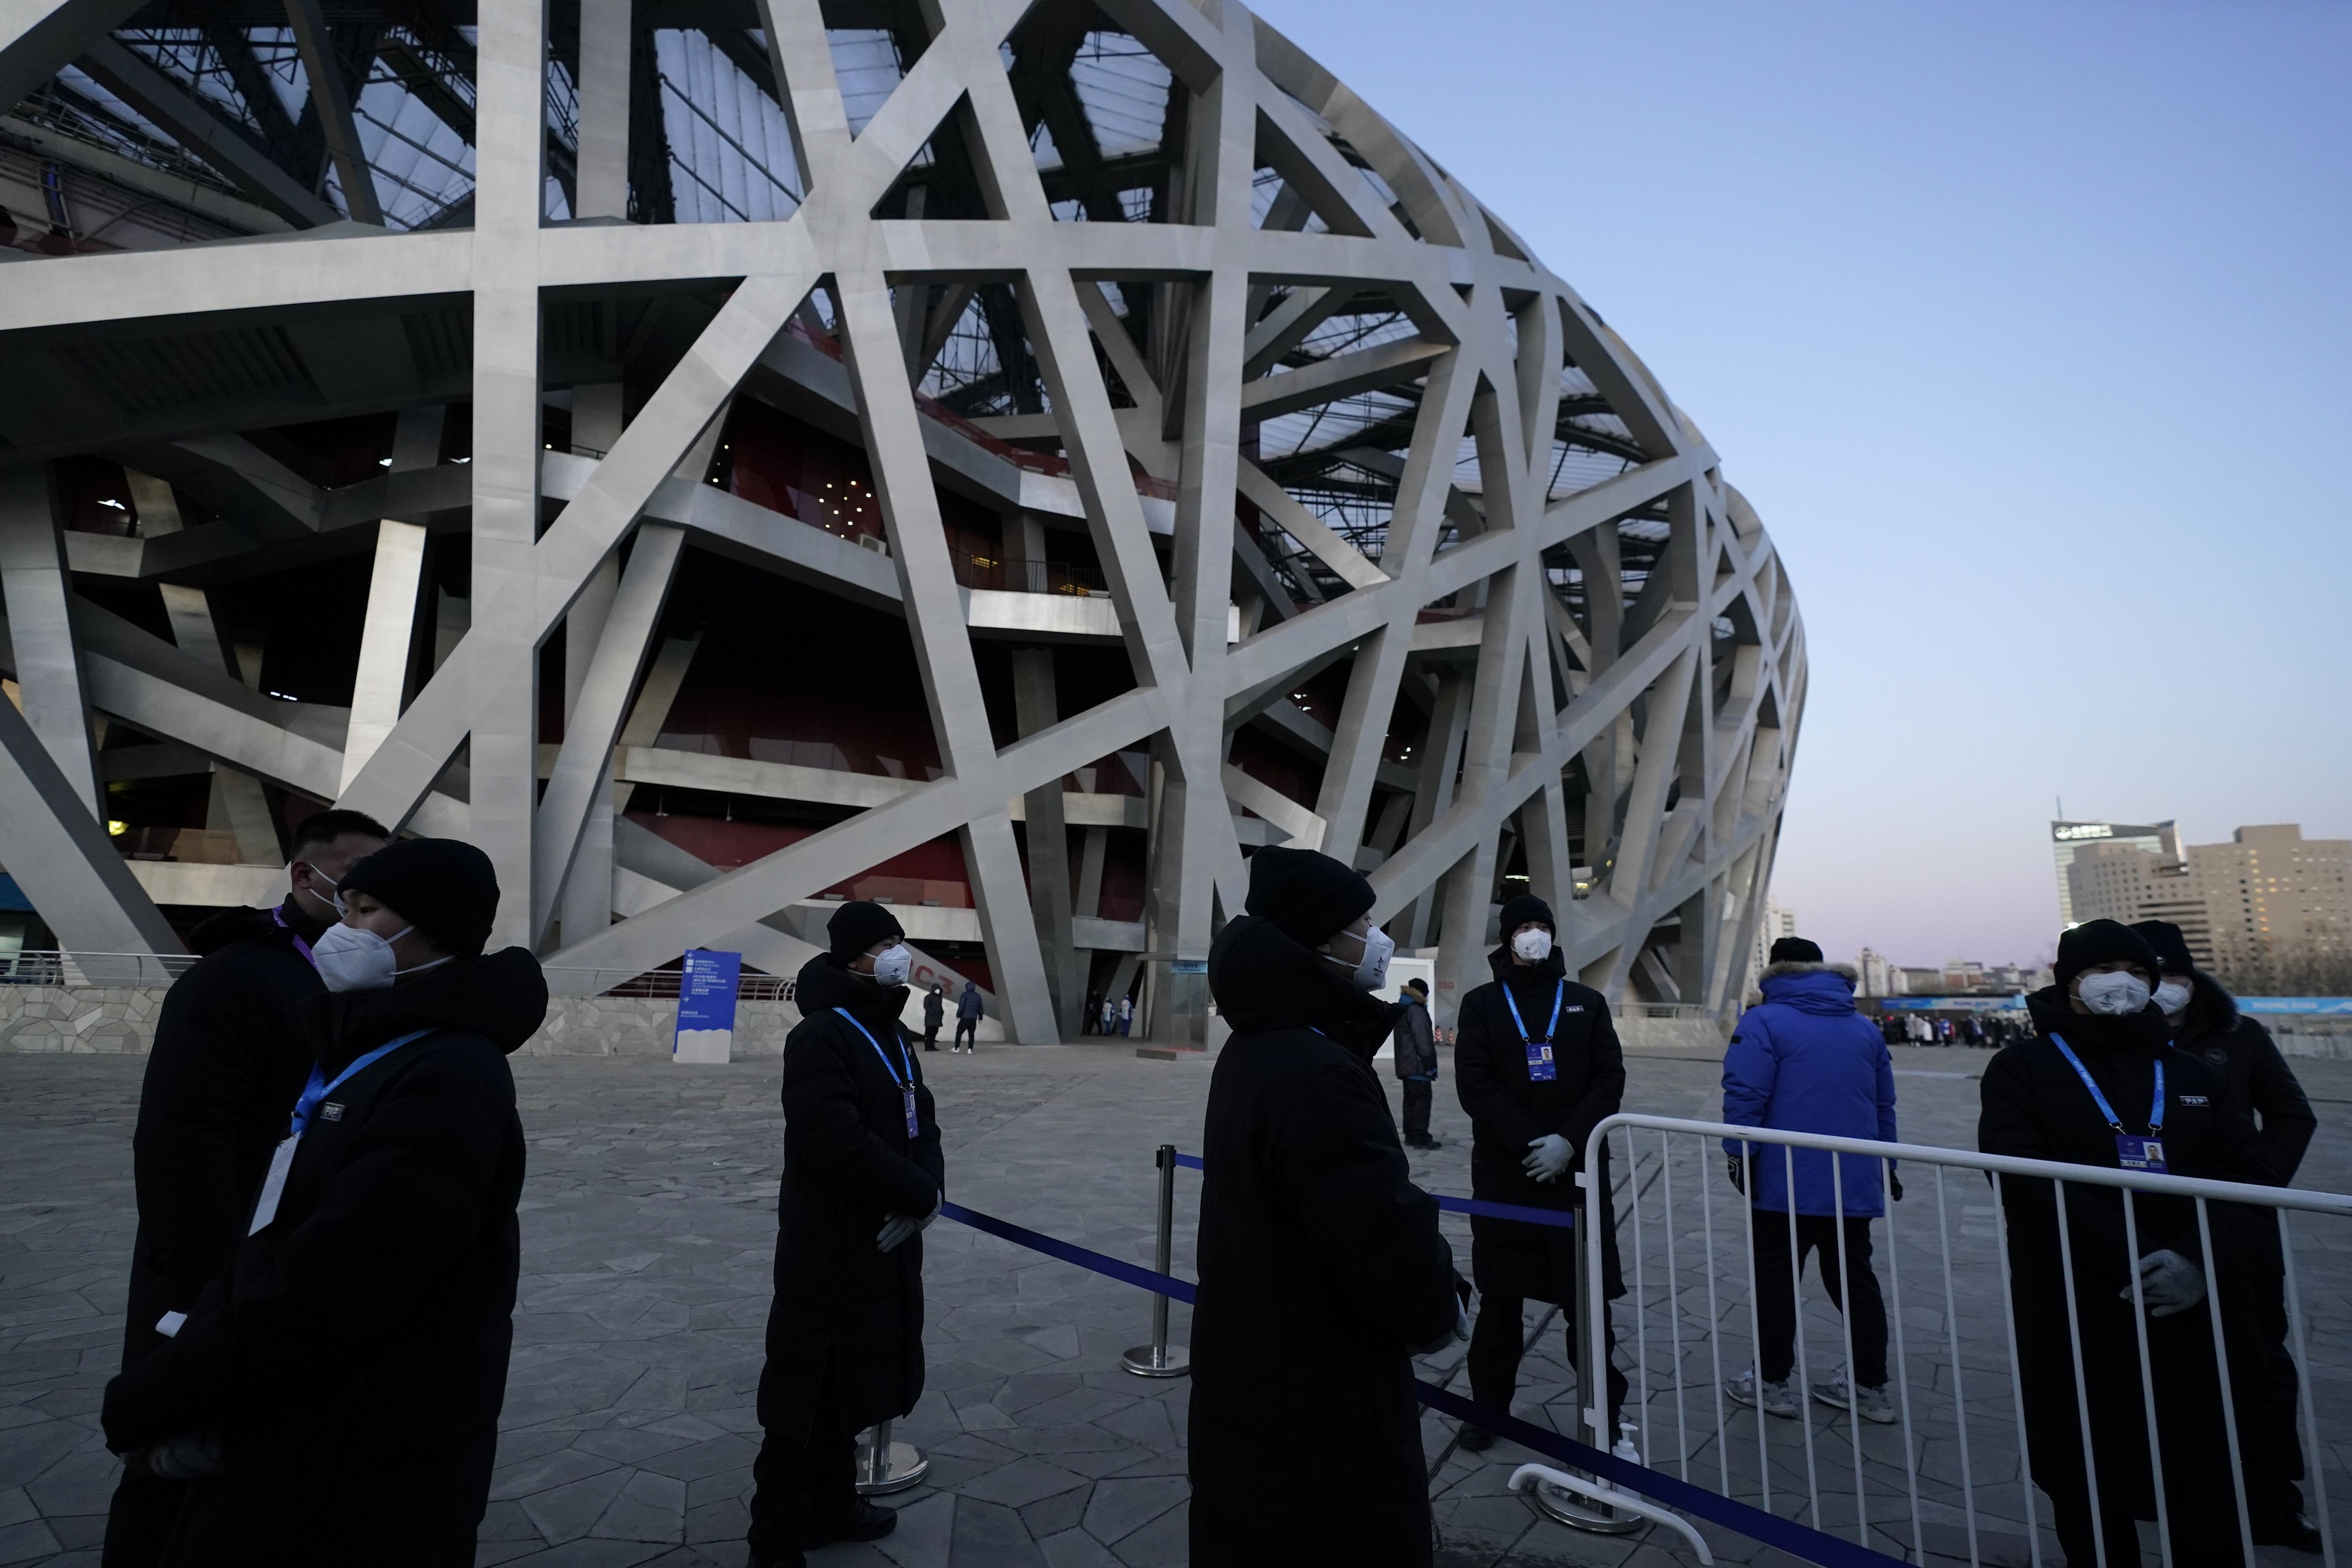 Security stand outside the National Stadium known as the Bird's Nest ahead of the opening ceremony of the 2022 Winter Olympics.